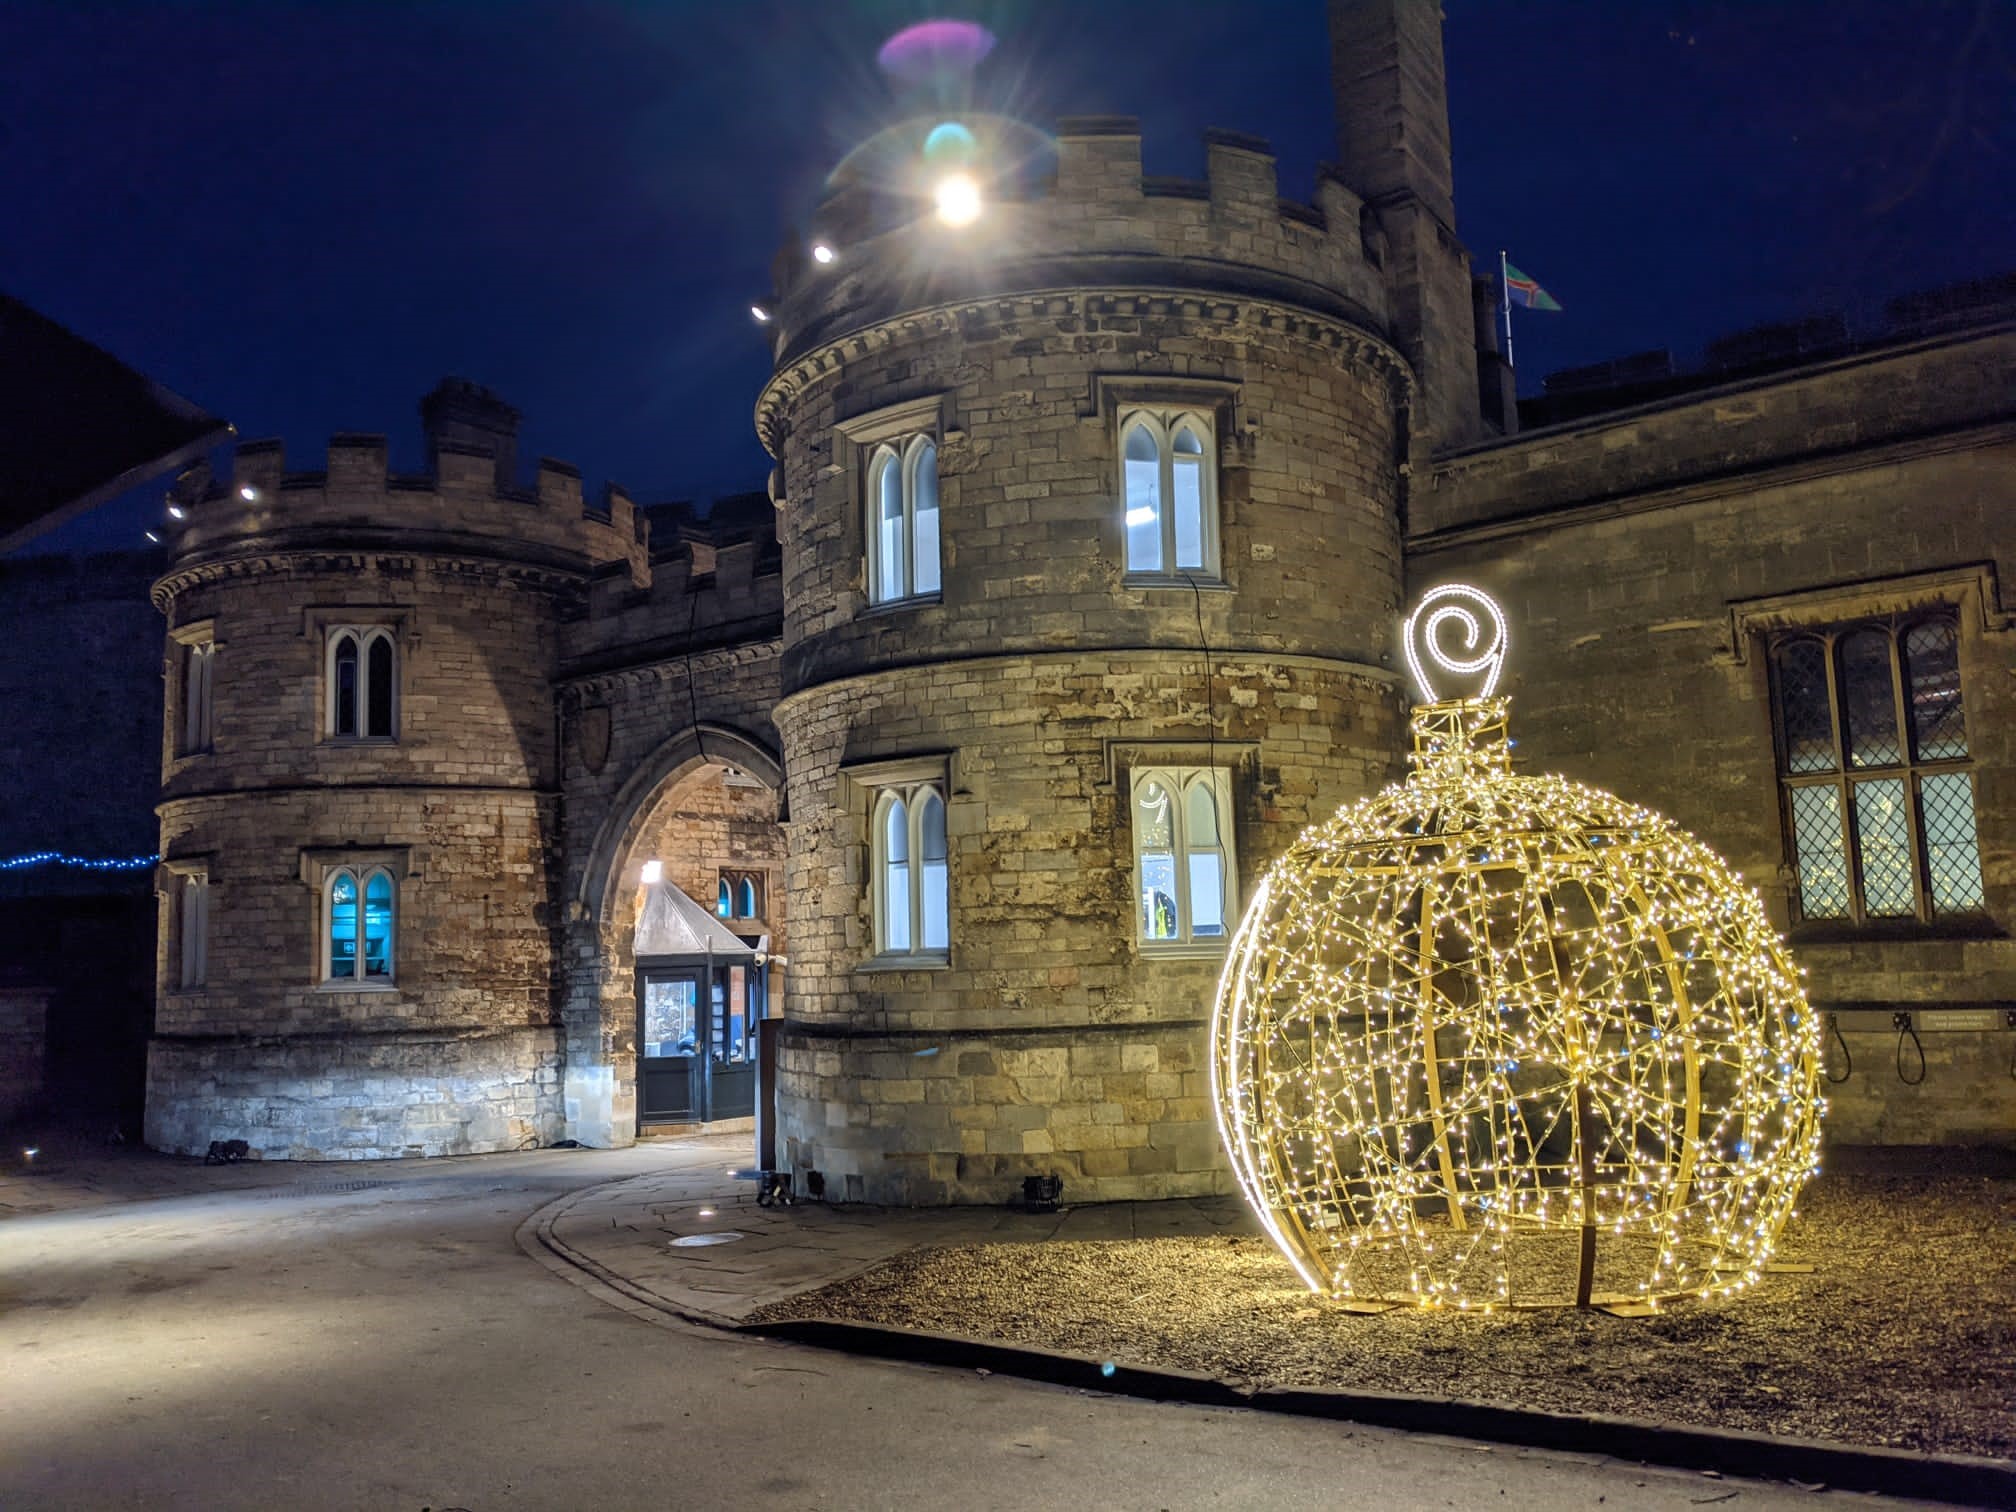 Gold light up bauble motif displayed outside the entrance to Lincoln Castle.